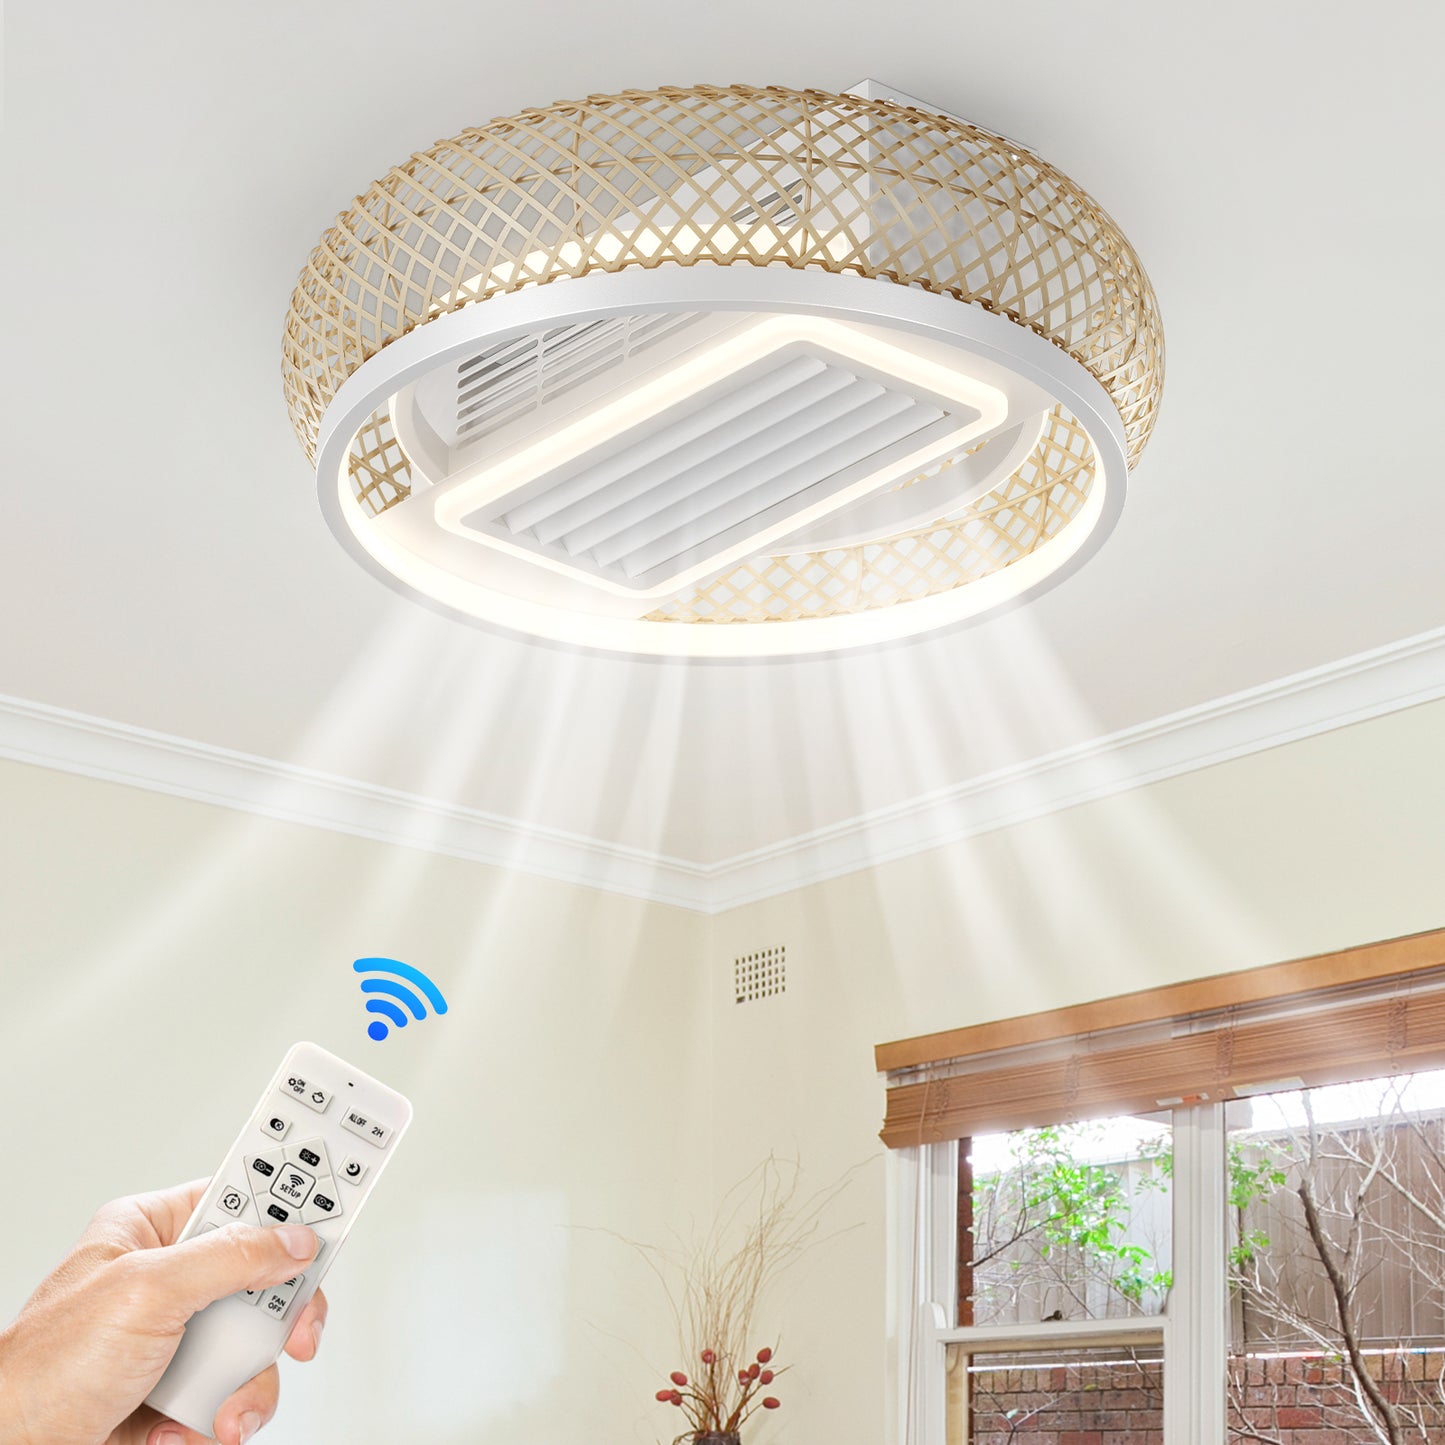 Bladeless Ceiling Fan with Remote-Controlled Dimmable LED Lights